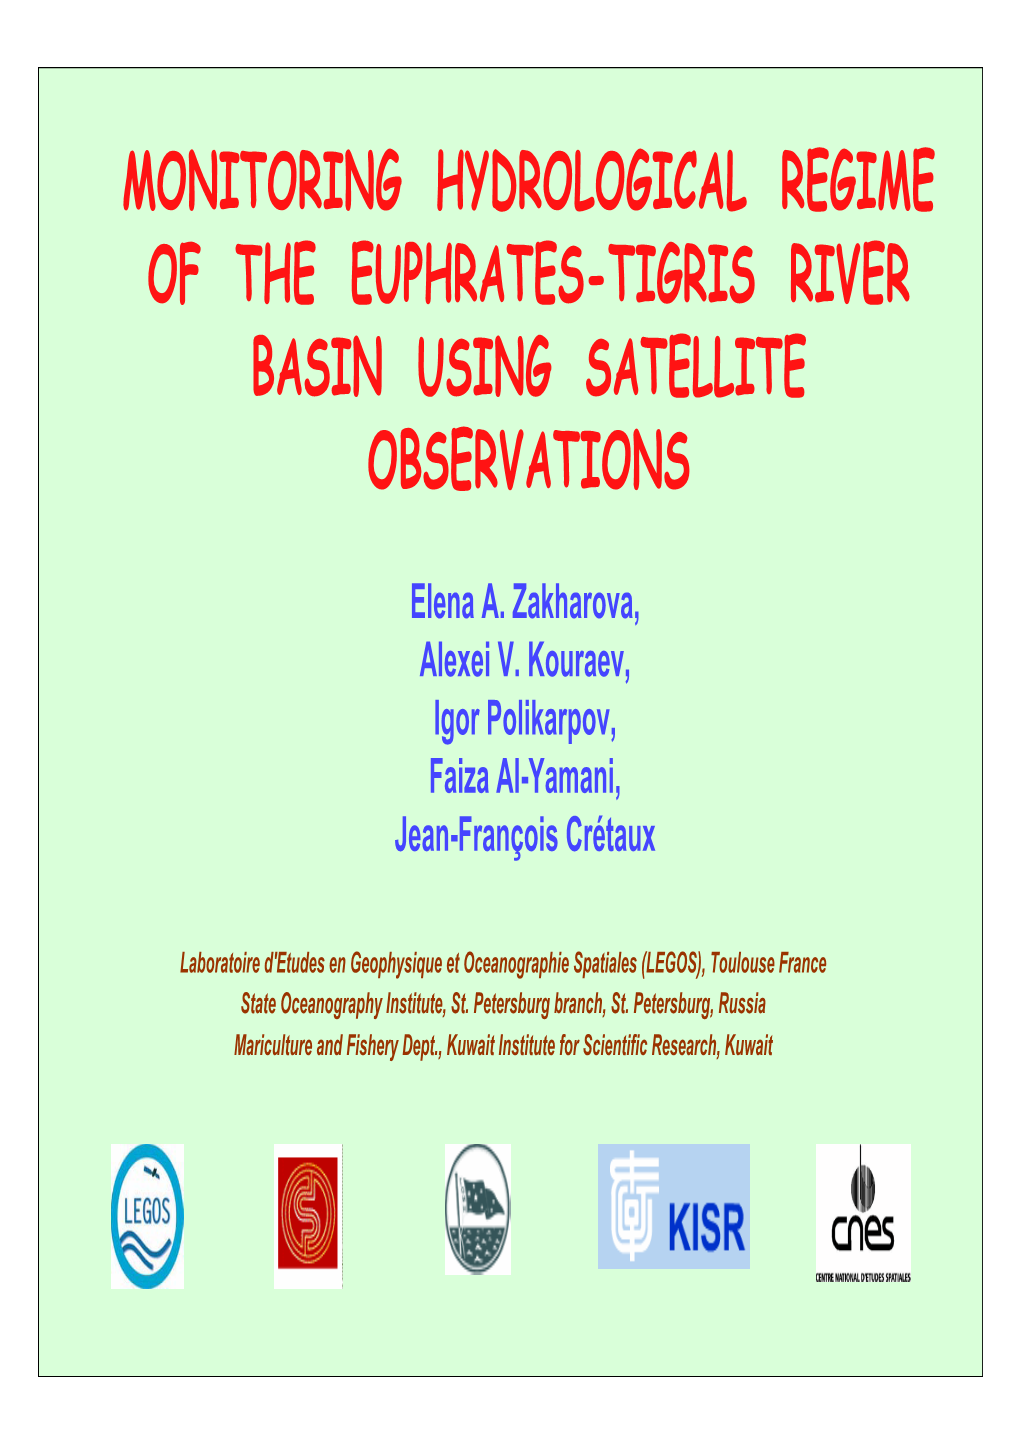 Monitoring Hydrological Regime of the Euphrates-Tigris River Basin Using Satellite Observations